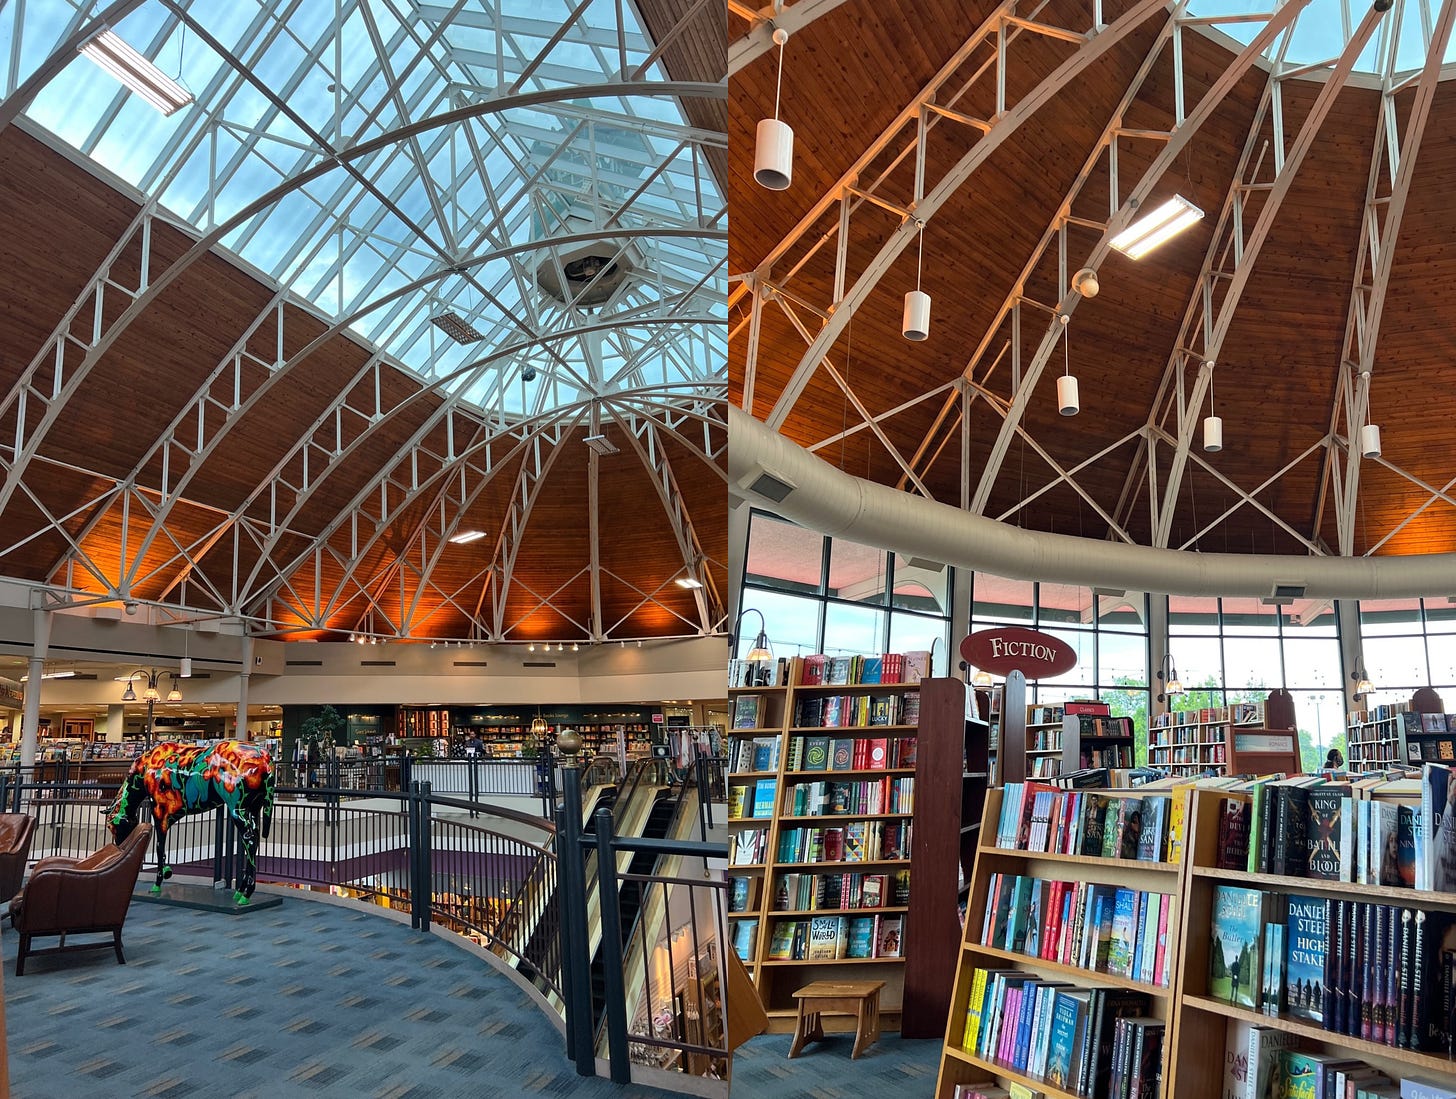 A collage of two images of Joseph Beth Booksellers. They show a large open area with skylights in the ceiling and bookshelves everywhere. 